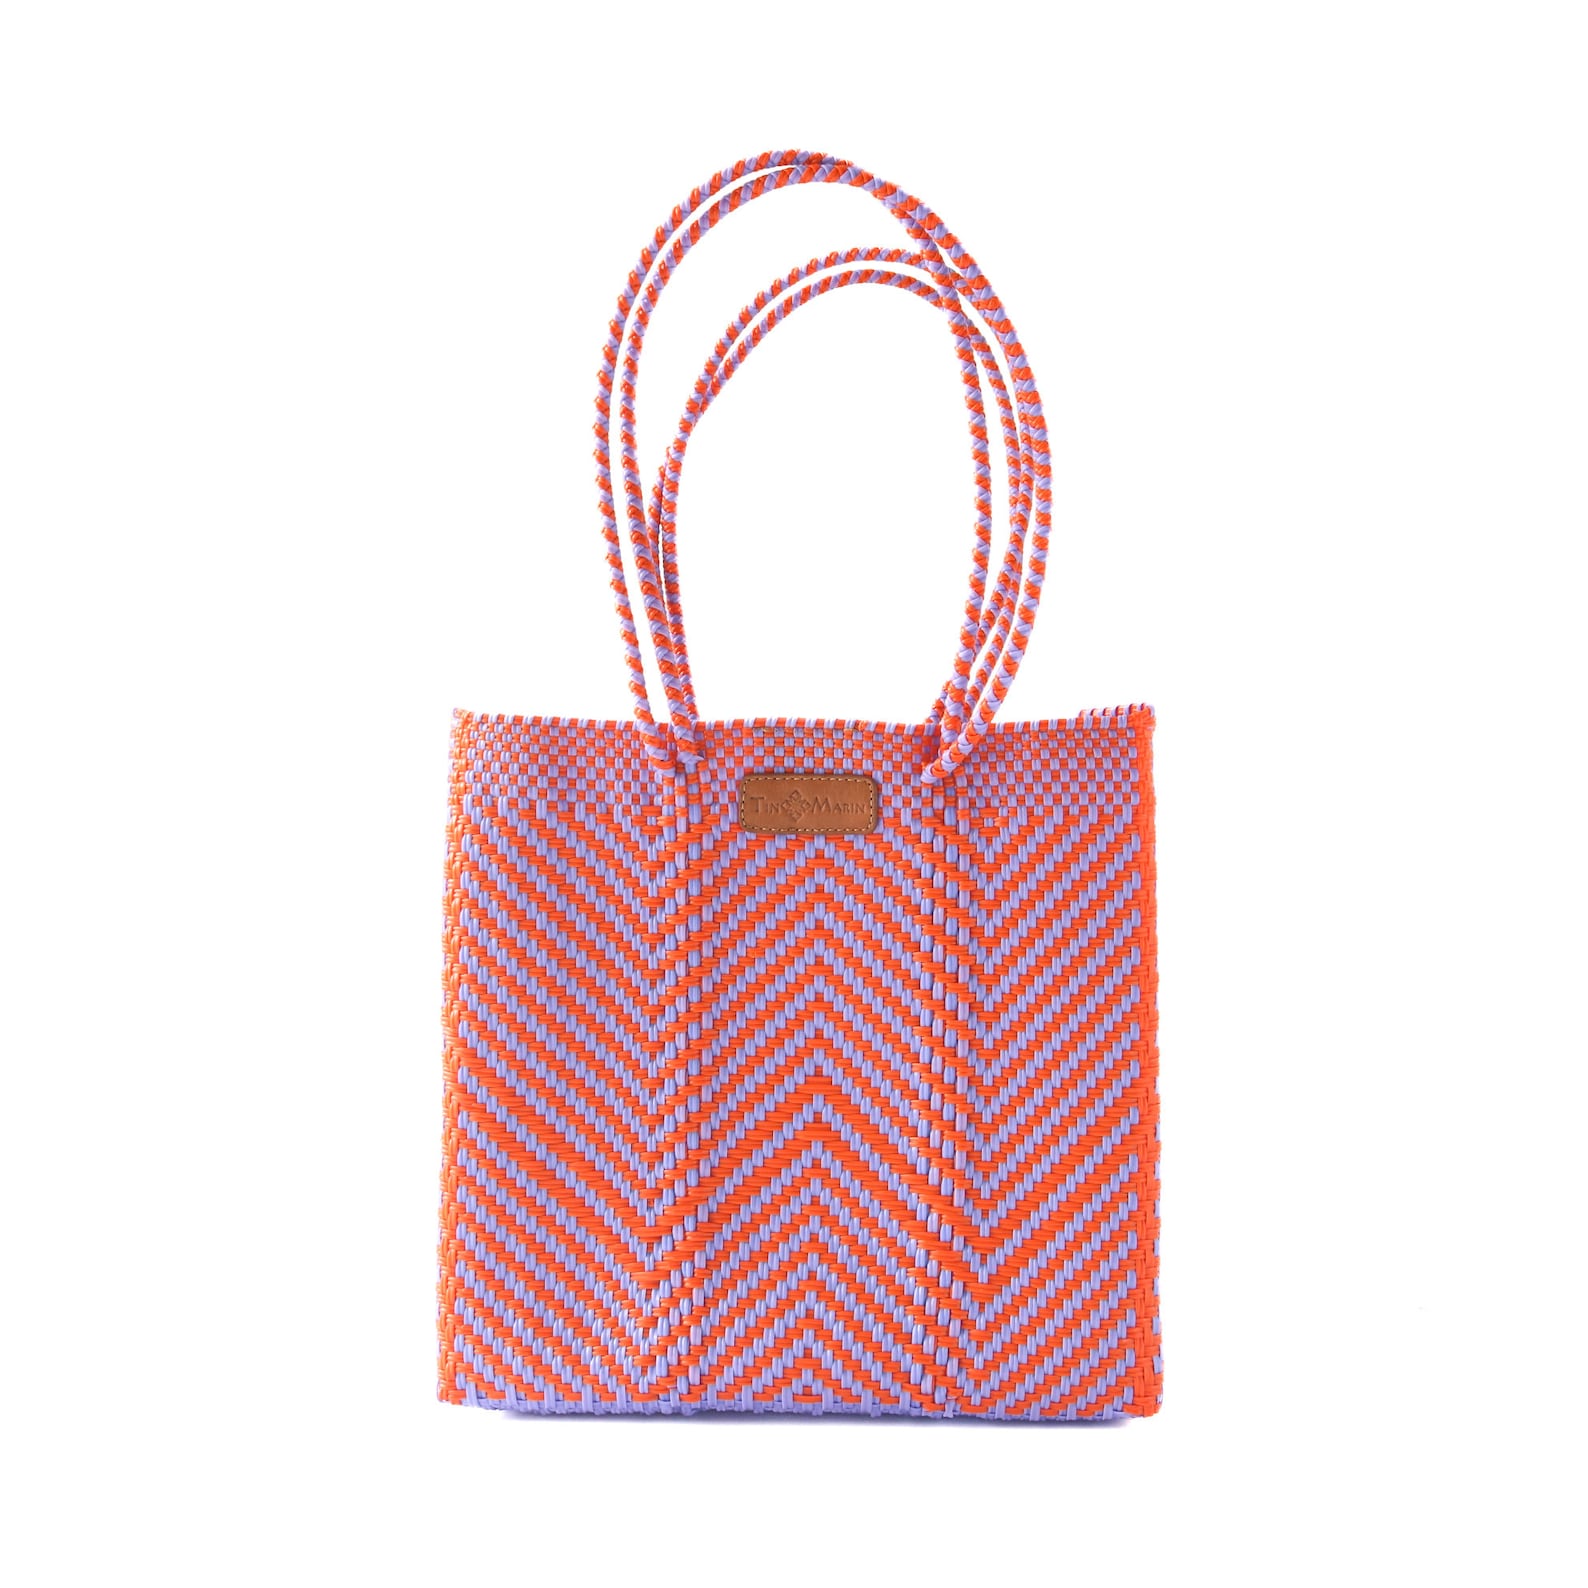 Recycled Plastic Woven Beach Tote Bag Pink